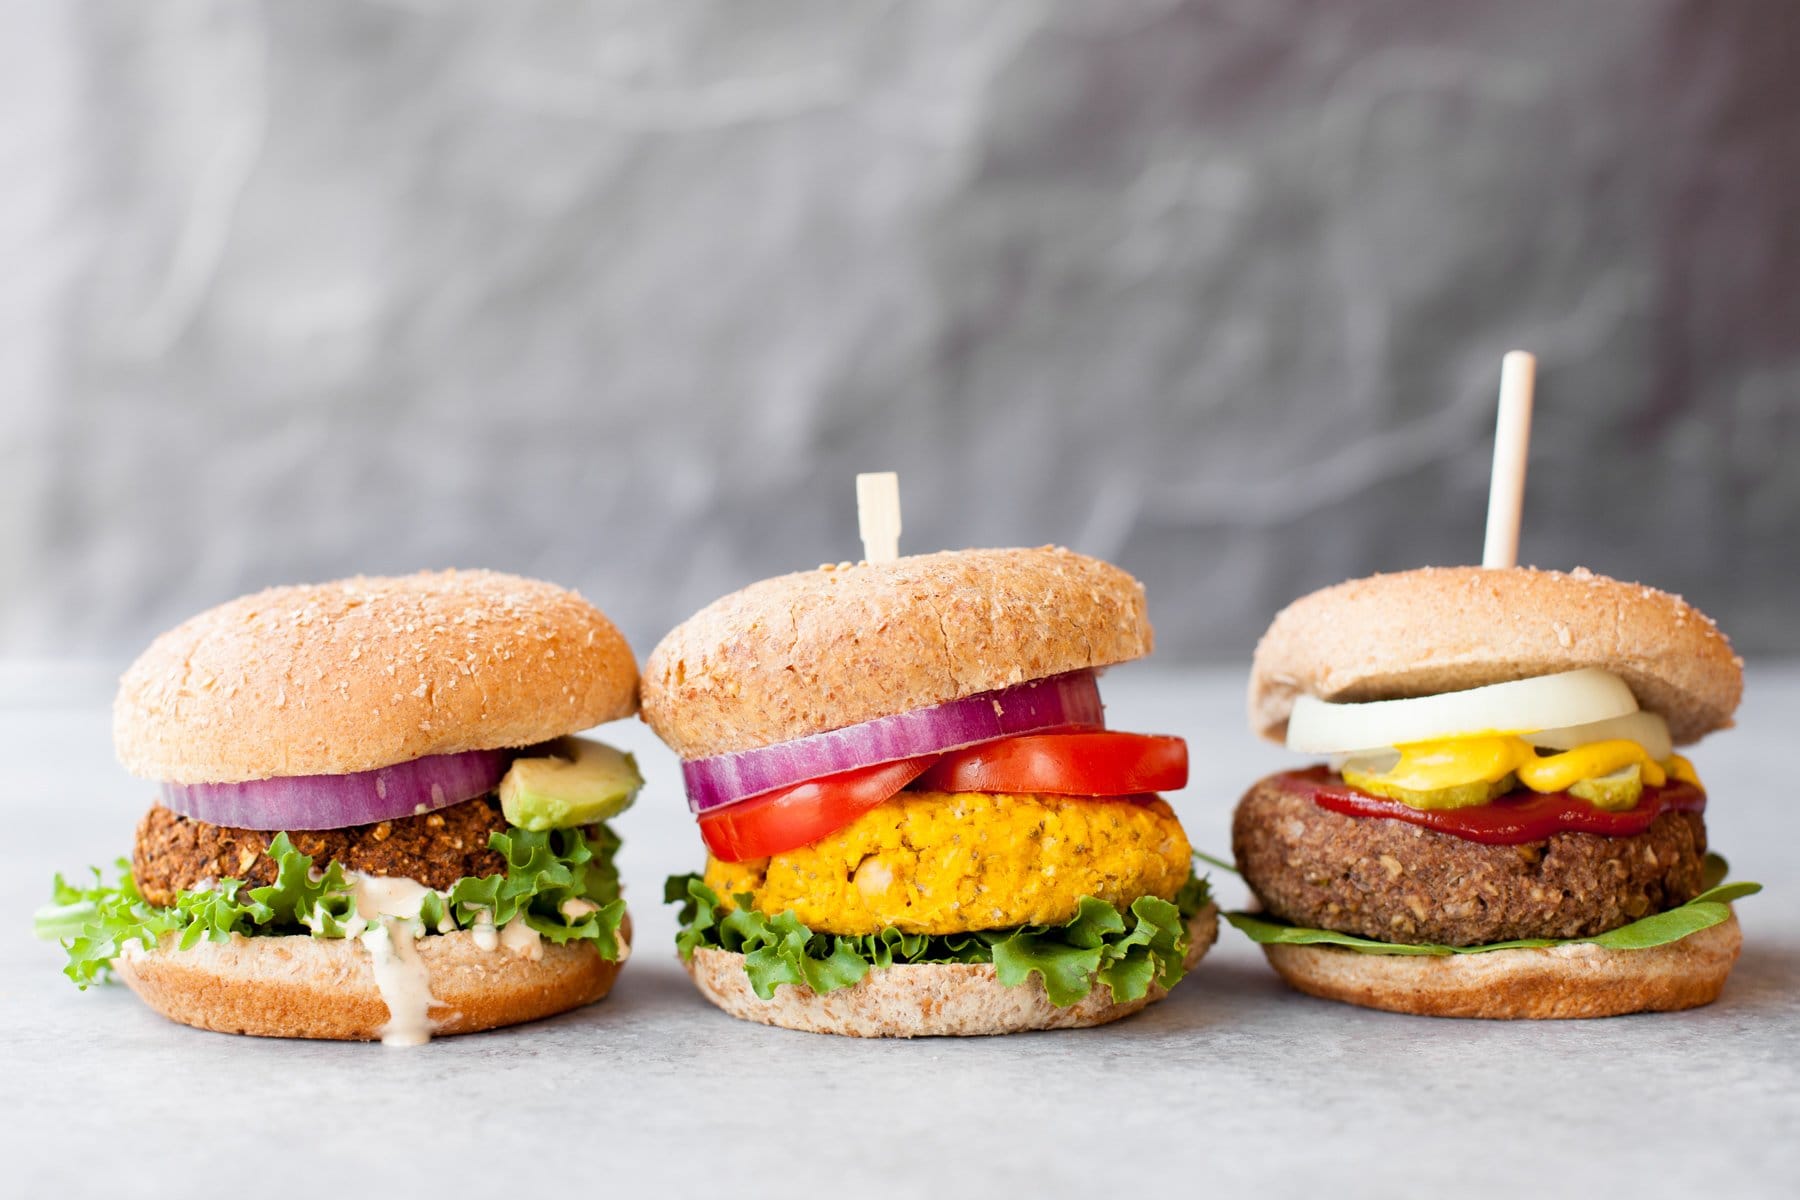 Stock Your Freezer with These 3 Awesome Veggie Burgers